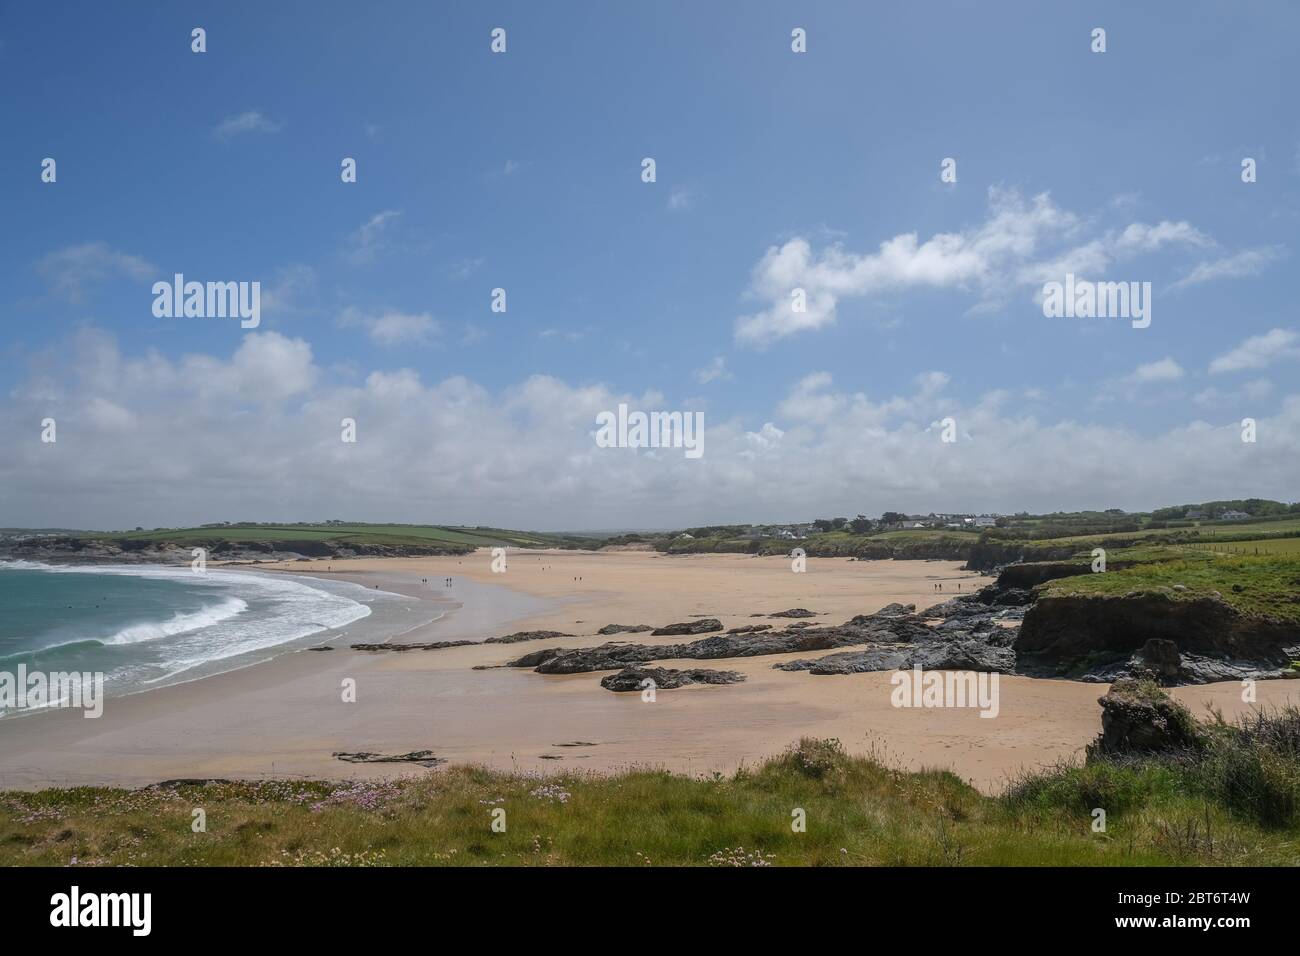 Harlyn Bay, near Padstow, Cornwall, UK. 23rd May 2020. UK Weather. The beach was relatively quiet at Harlyn Bay this afternoon, with walkers and surfers out enjoying the sunny start to the bank holiday weekend. Credit CWPIX / Alamy Live News. Stock Photo